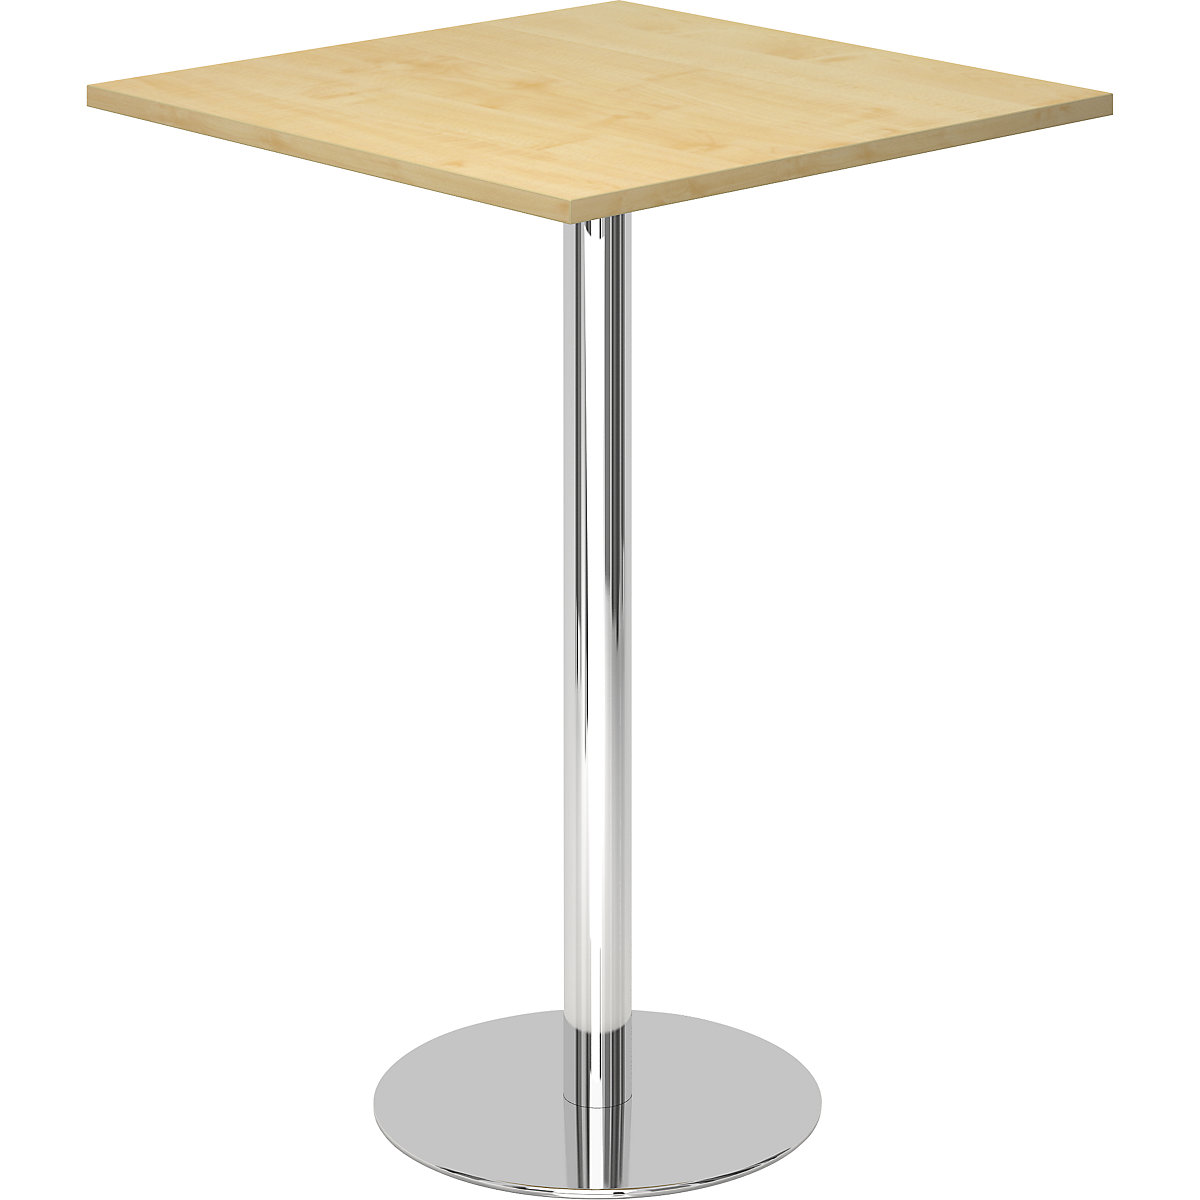 Pedestal table, LxW 800 x 800 mm, 1116 mm high, chrome plated frame, tabletop in maple finish-5